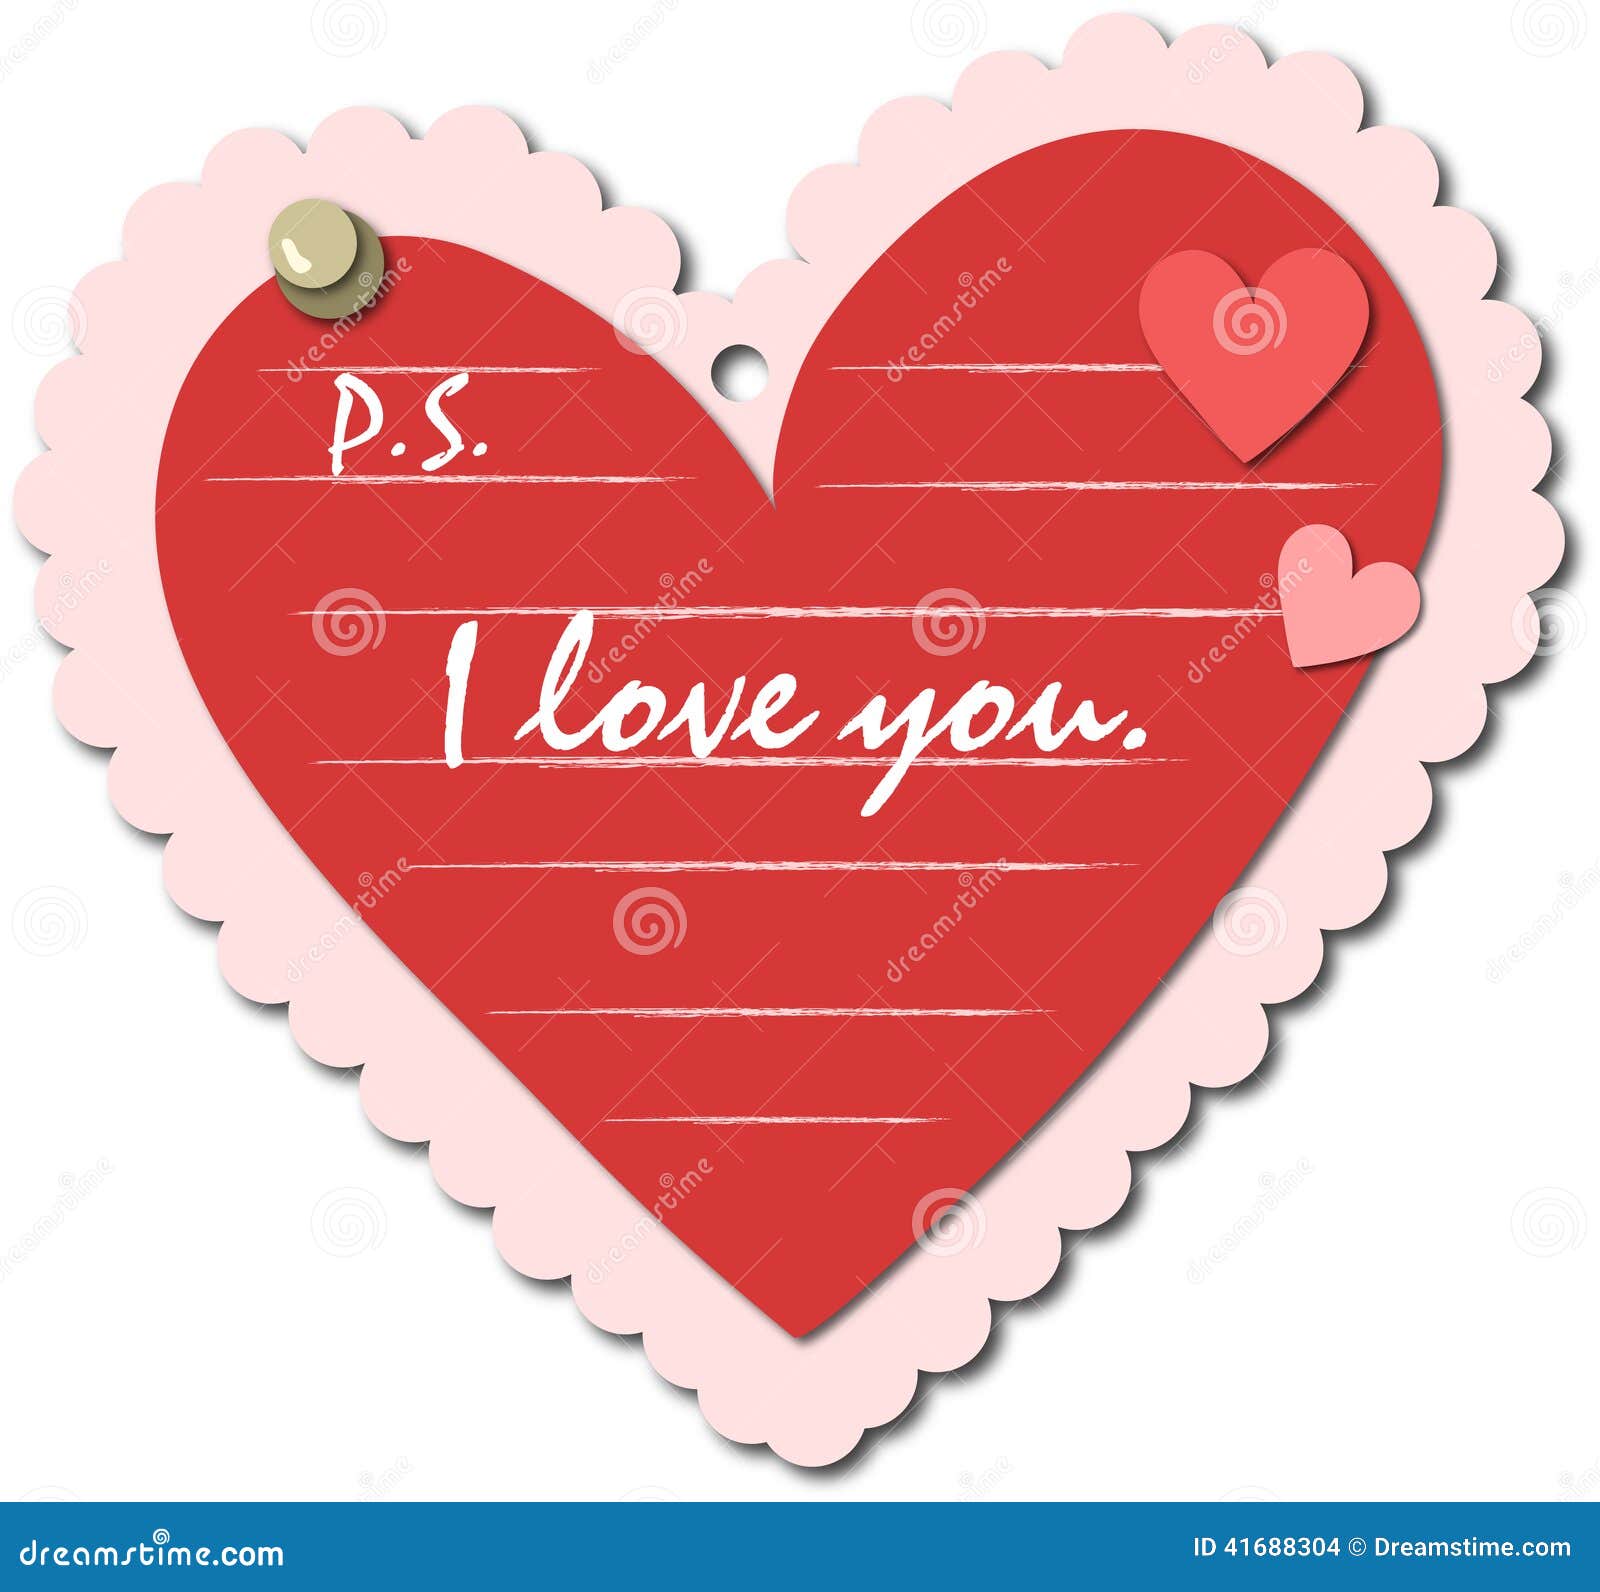 Red Heart Note stock illustration. Illustration of loveyou - 41688304